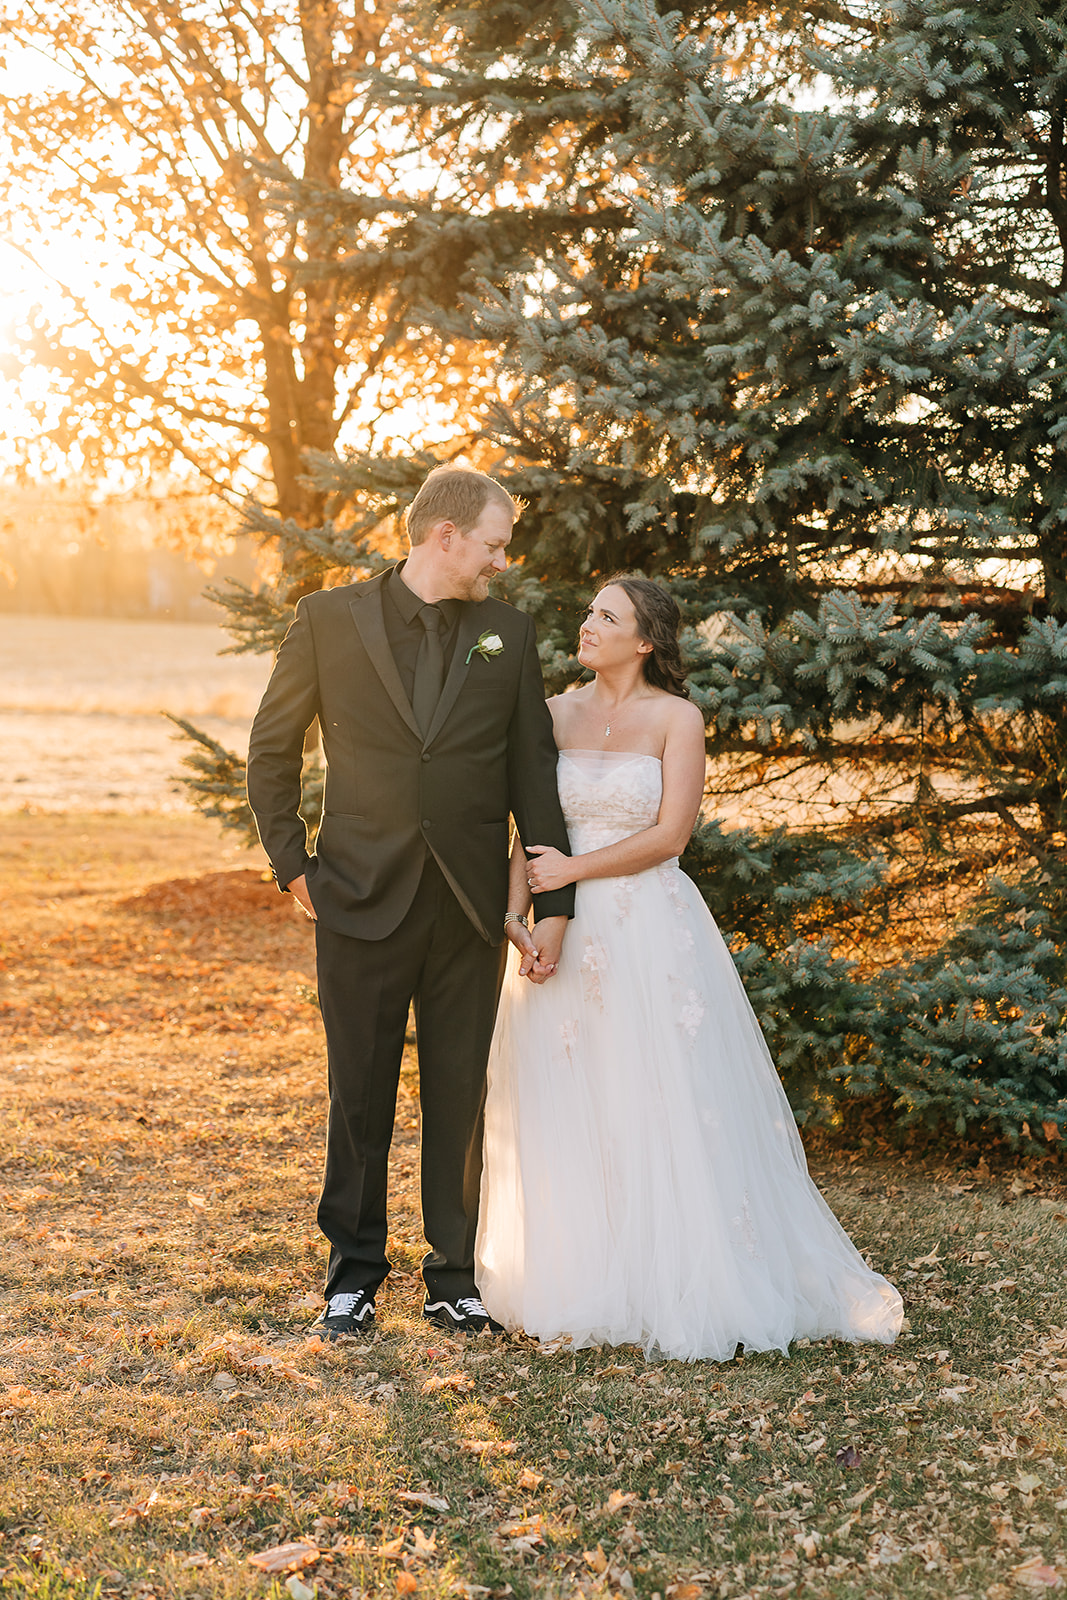 A bride and groom embrace in the golden hour light of a sunset in Minnesota